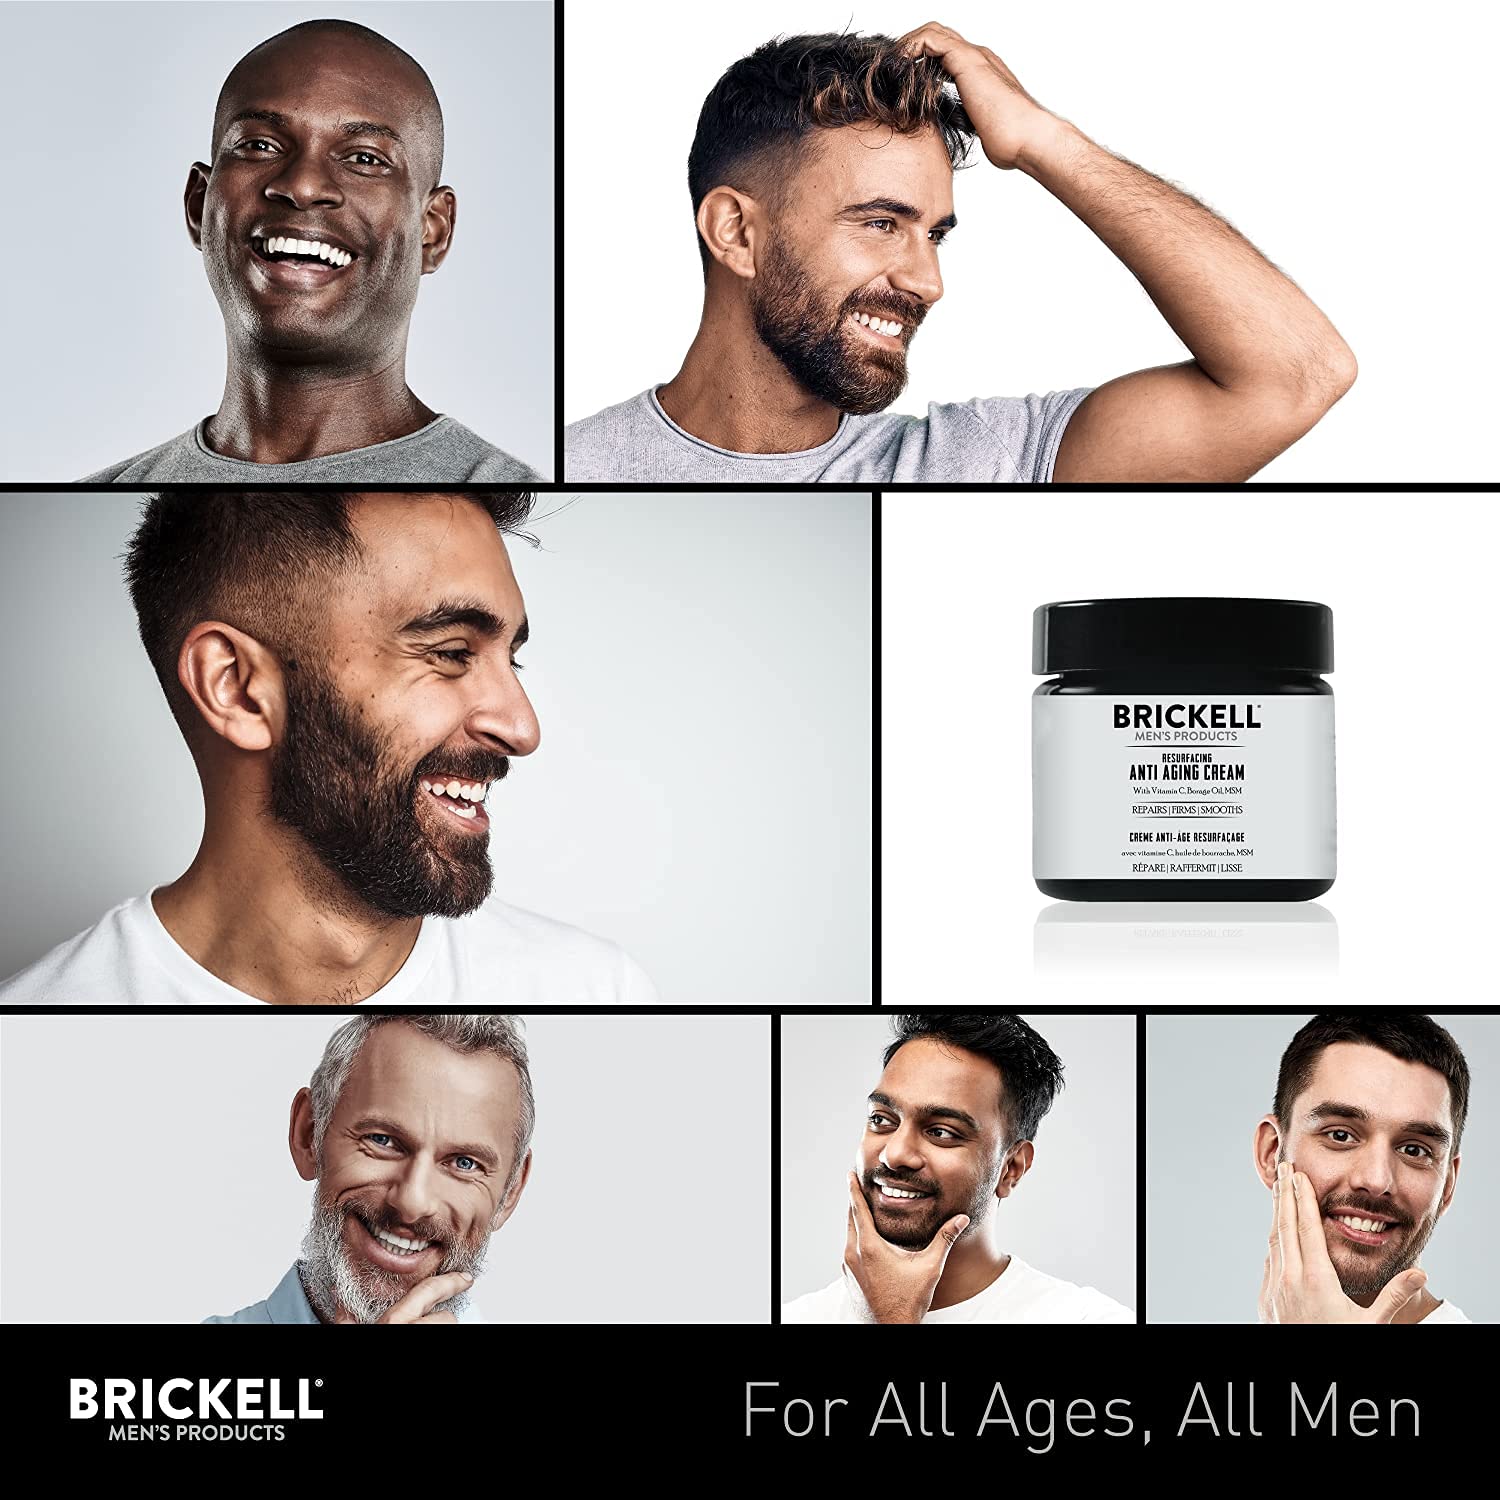 Brickell Mens Products Resurfacing Anti-Aging Face Cream For Men, Natural and Organic Face Moisturizer, Vitamin C Cream For Wrinkles, 2 Ounce, Scented